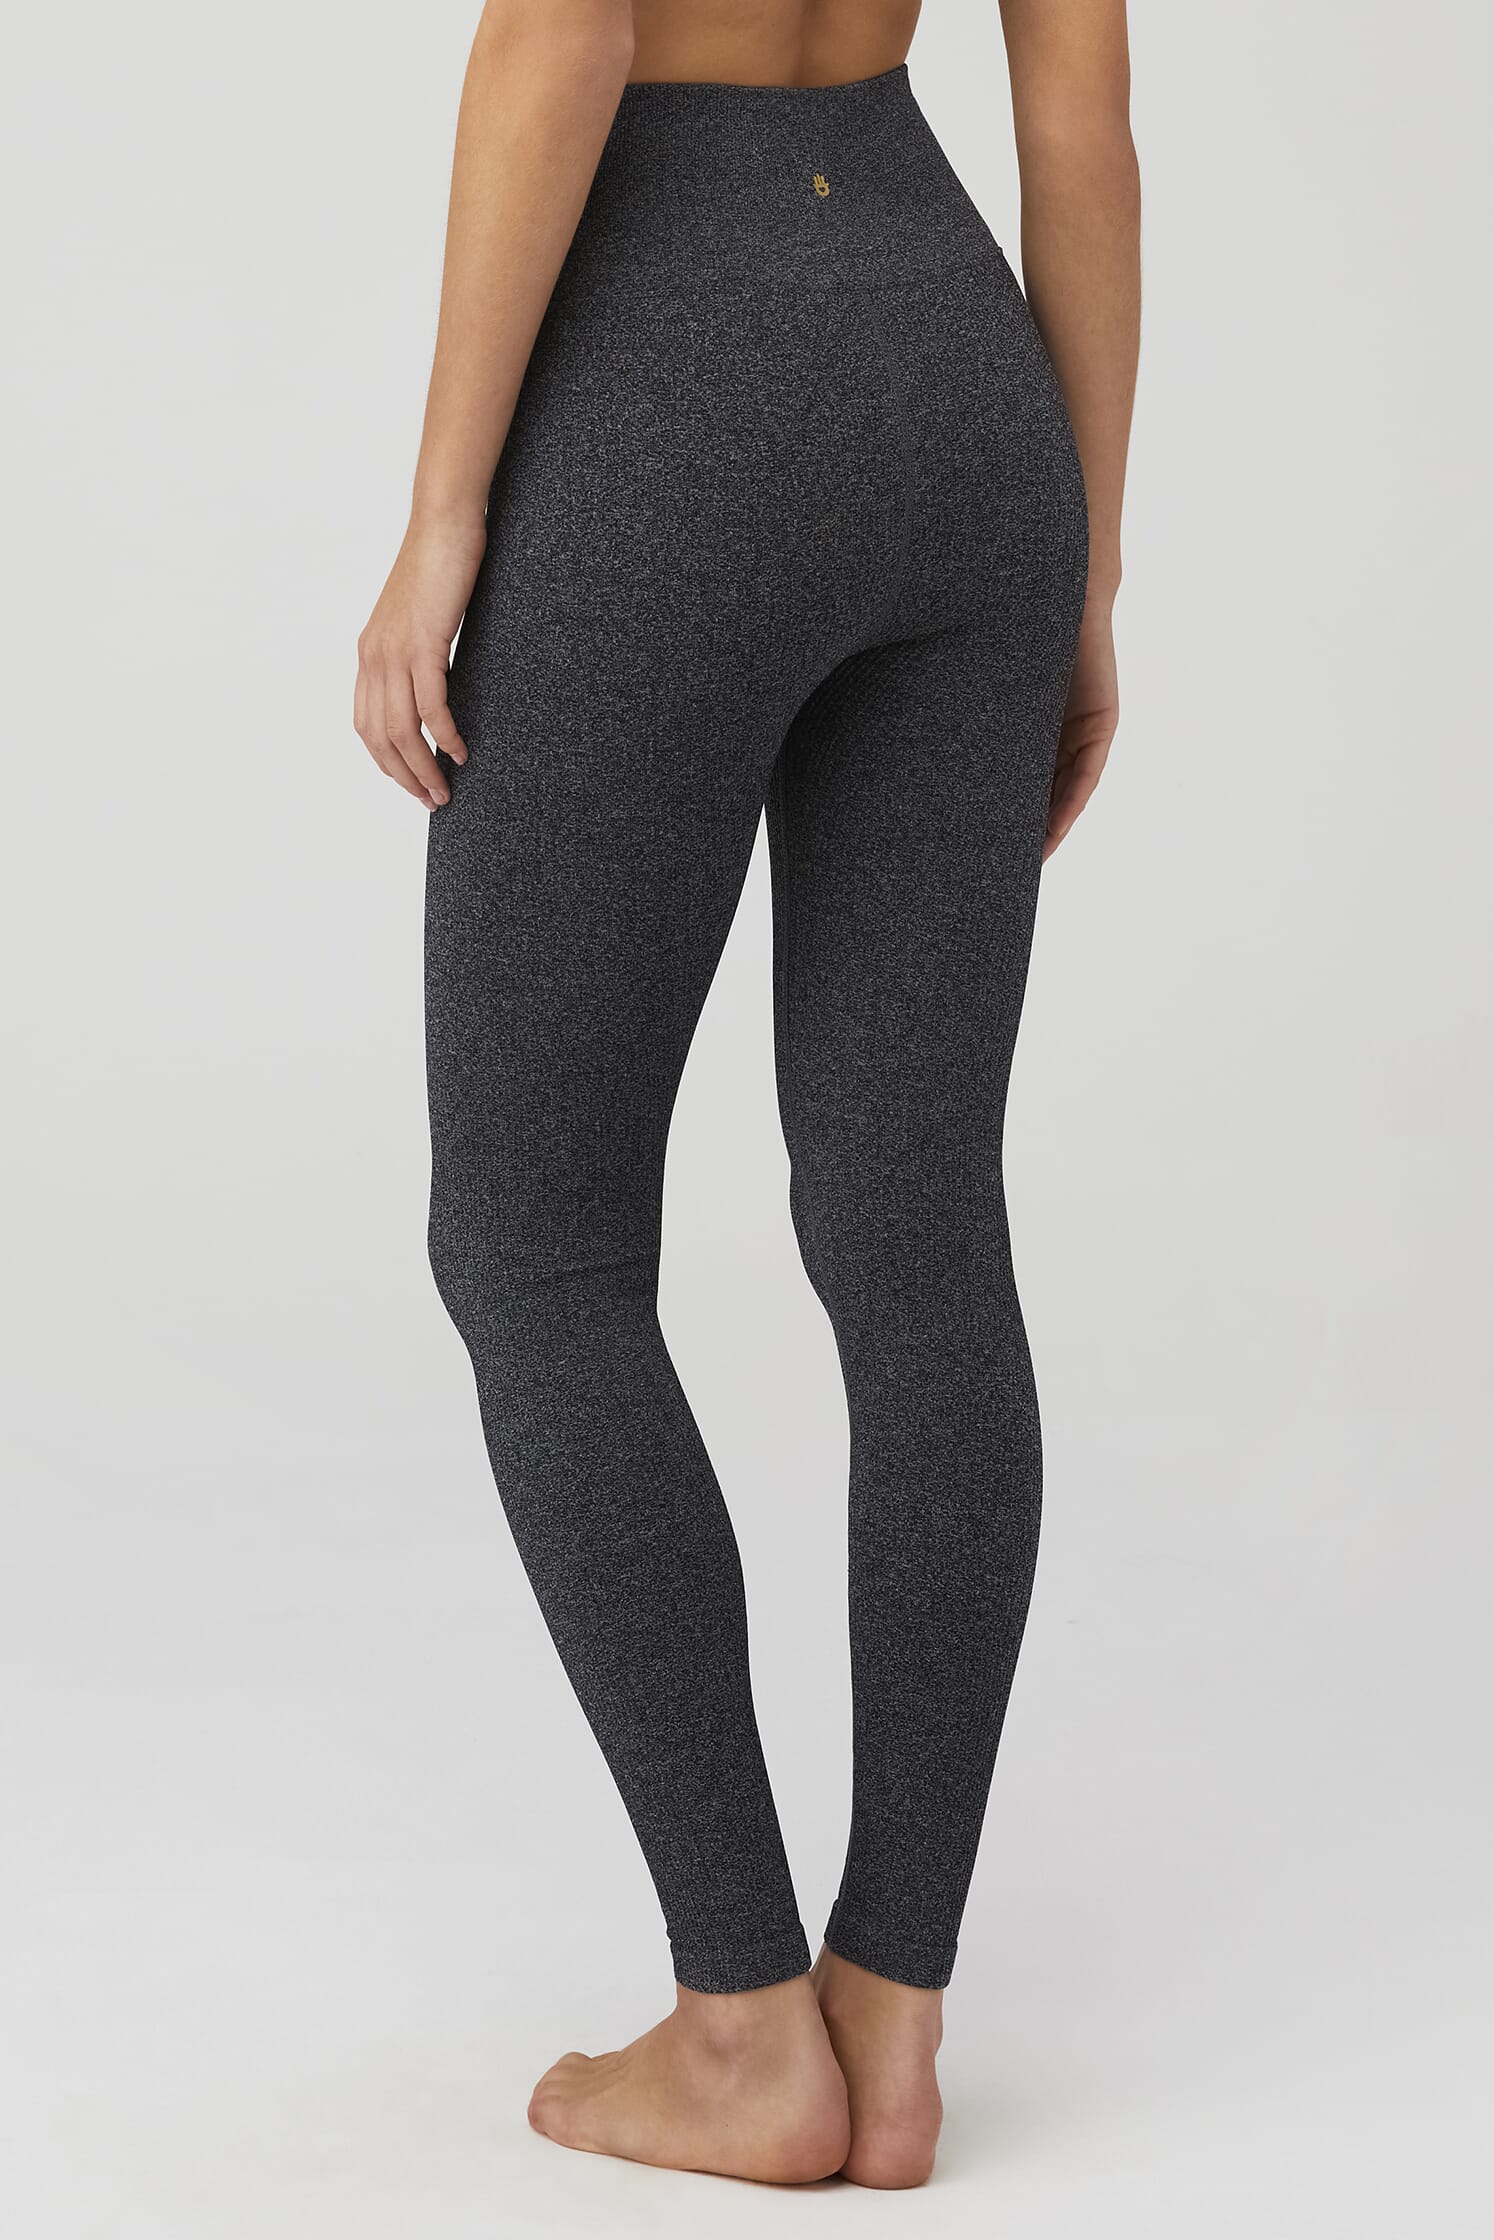 https://images.fashionpass.com/products/love-sculpt-heather-seamless-legging-spiritual-gangster-heather-charcoal-cd7-3.jpg?profile=a